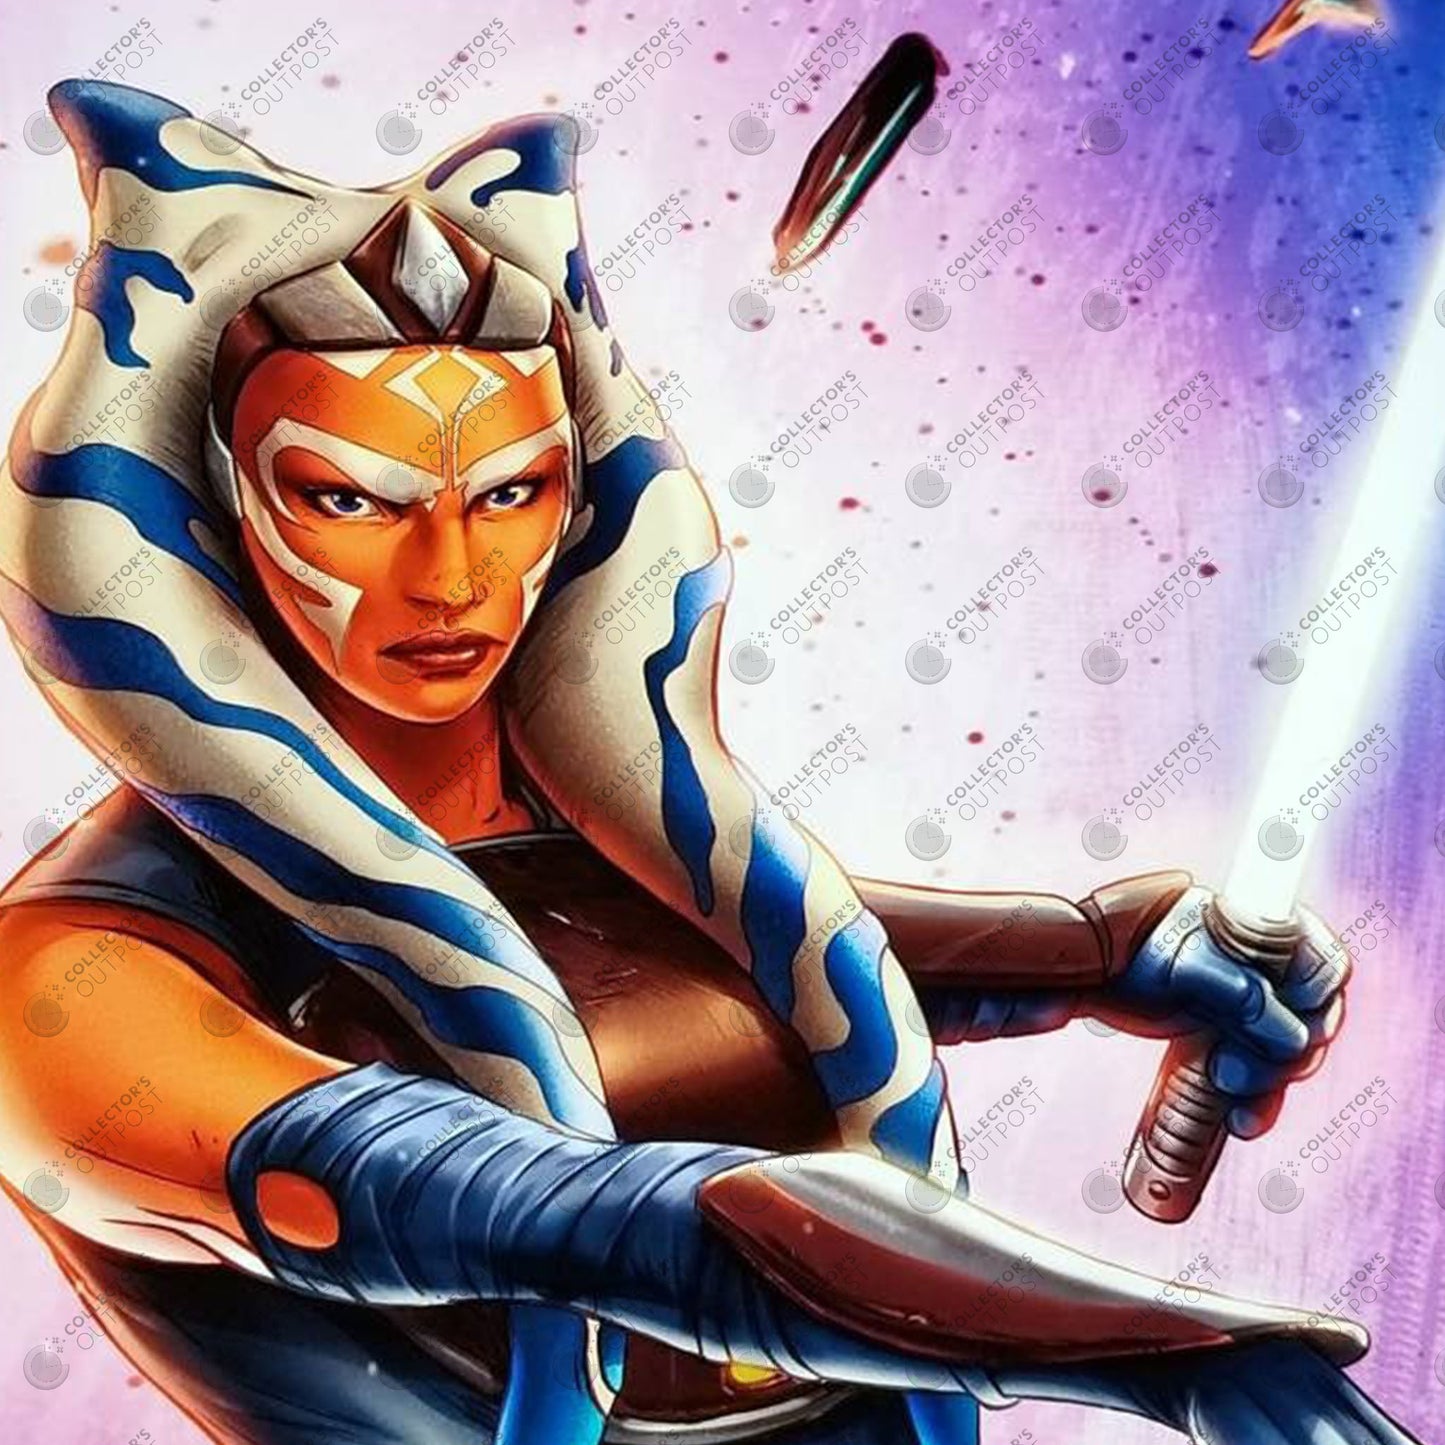 Ahsoka Tano I am no Jedi Includes License to resale on Customers Products  only. Cannot resell digital items of this graphic.